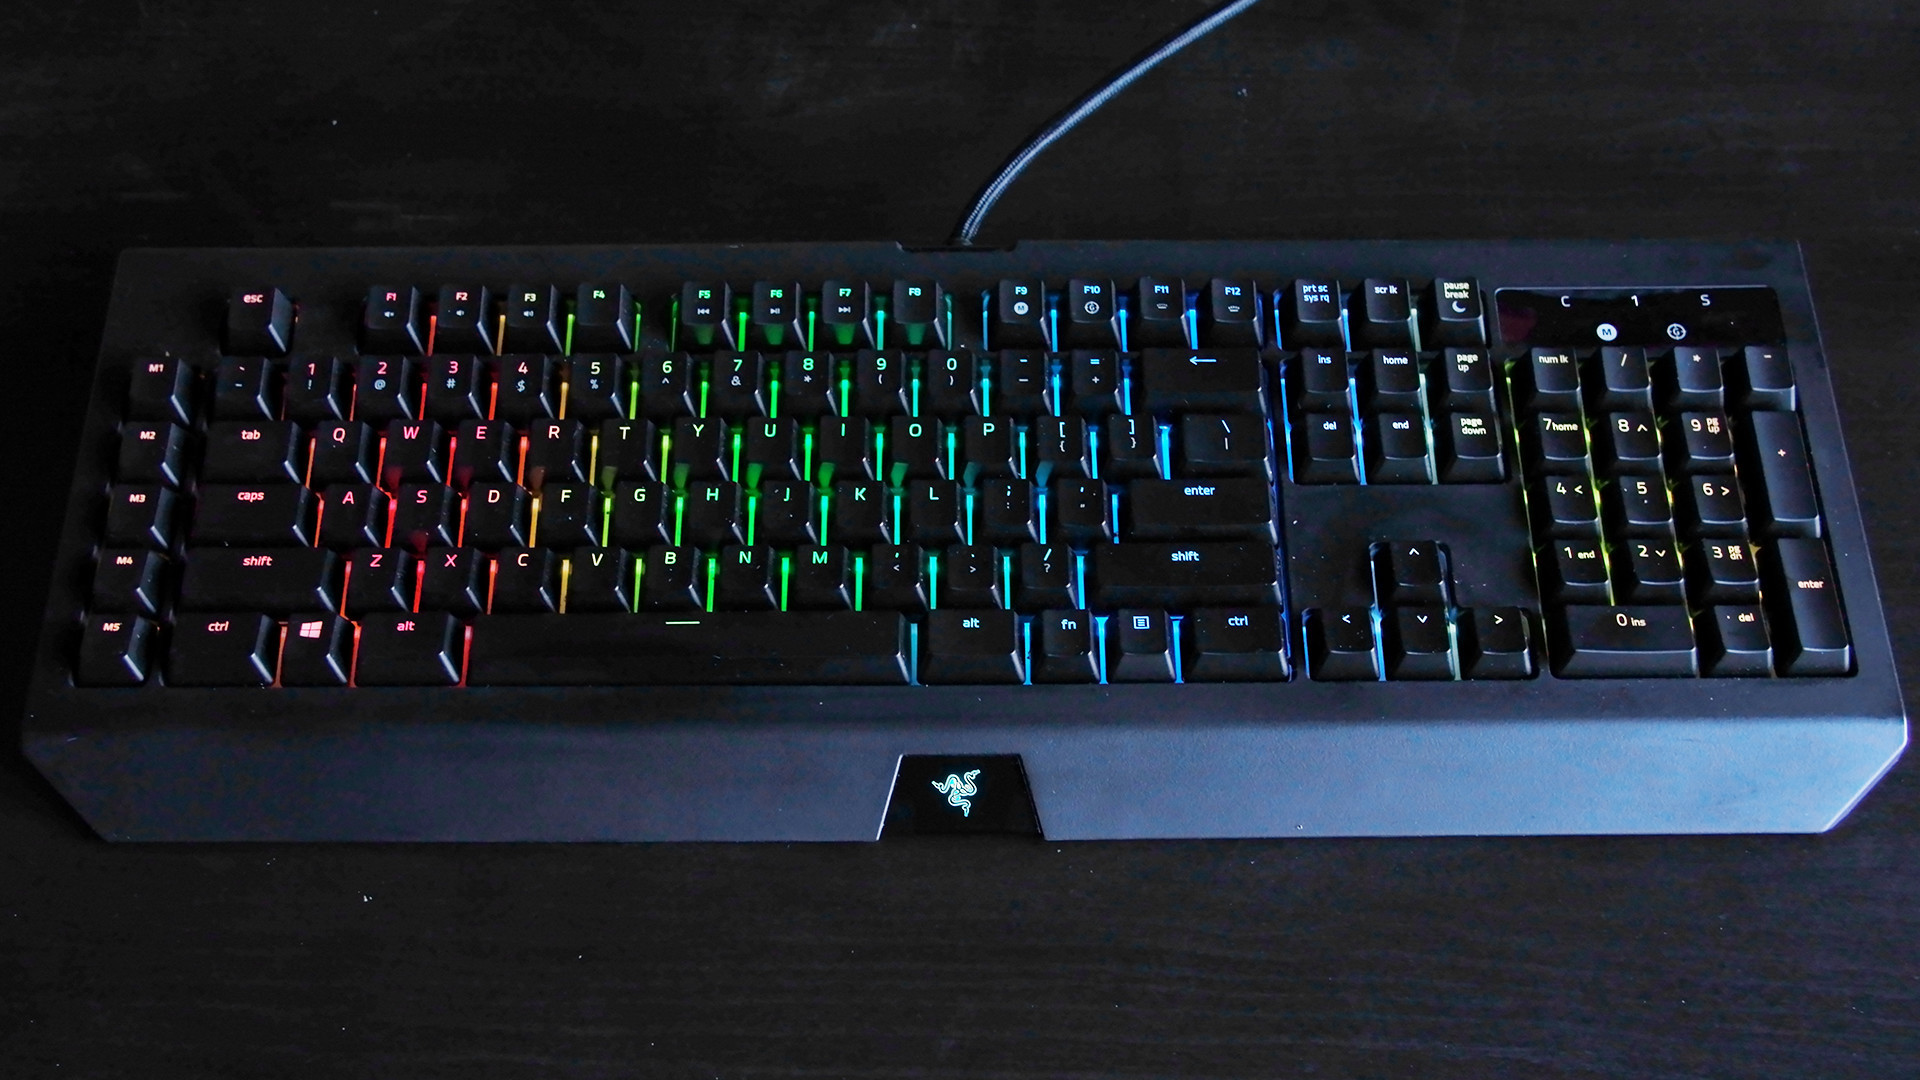 1920x1080 Razer Blackwidow Chroma V2 (Hardware) Review - The Complete Package 3